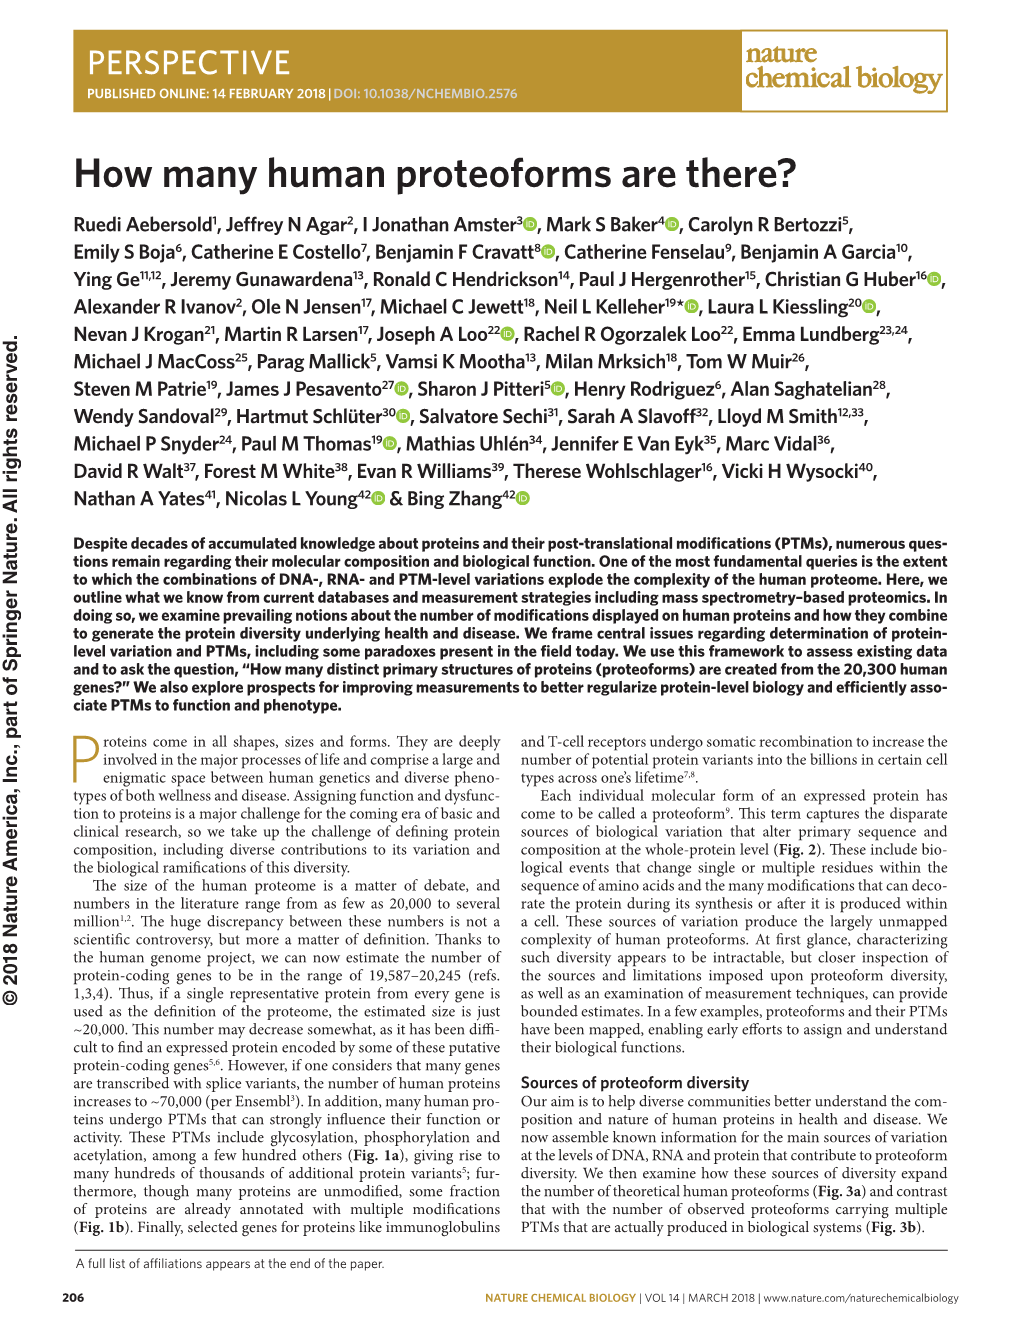 How Many Human Proteoforms Are There?